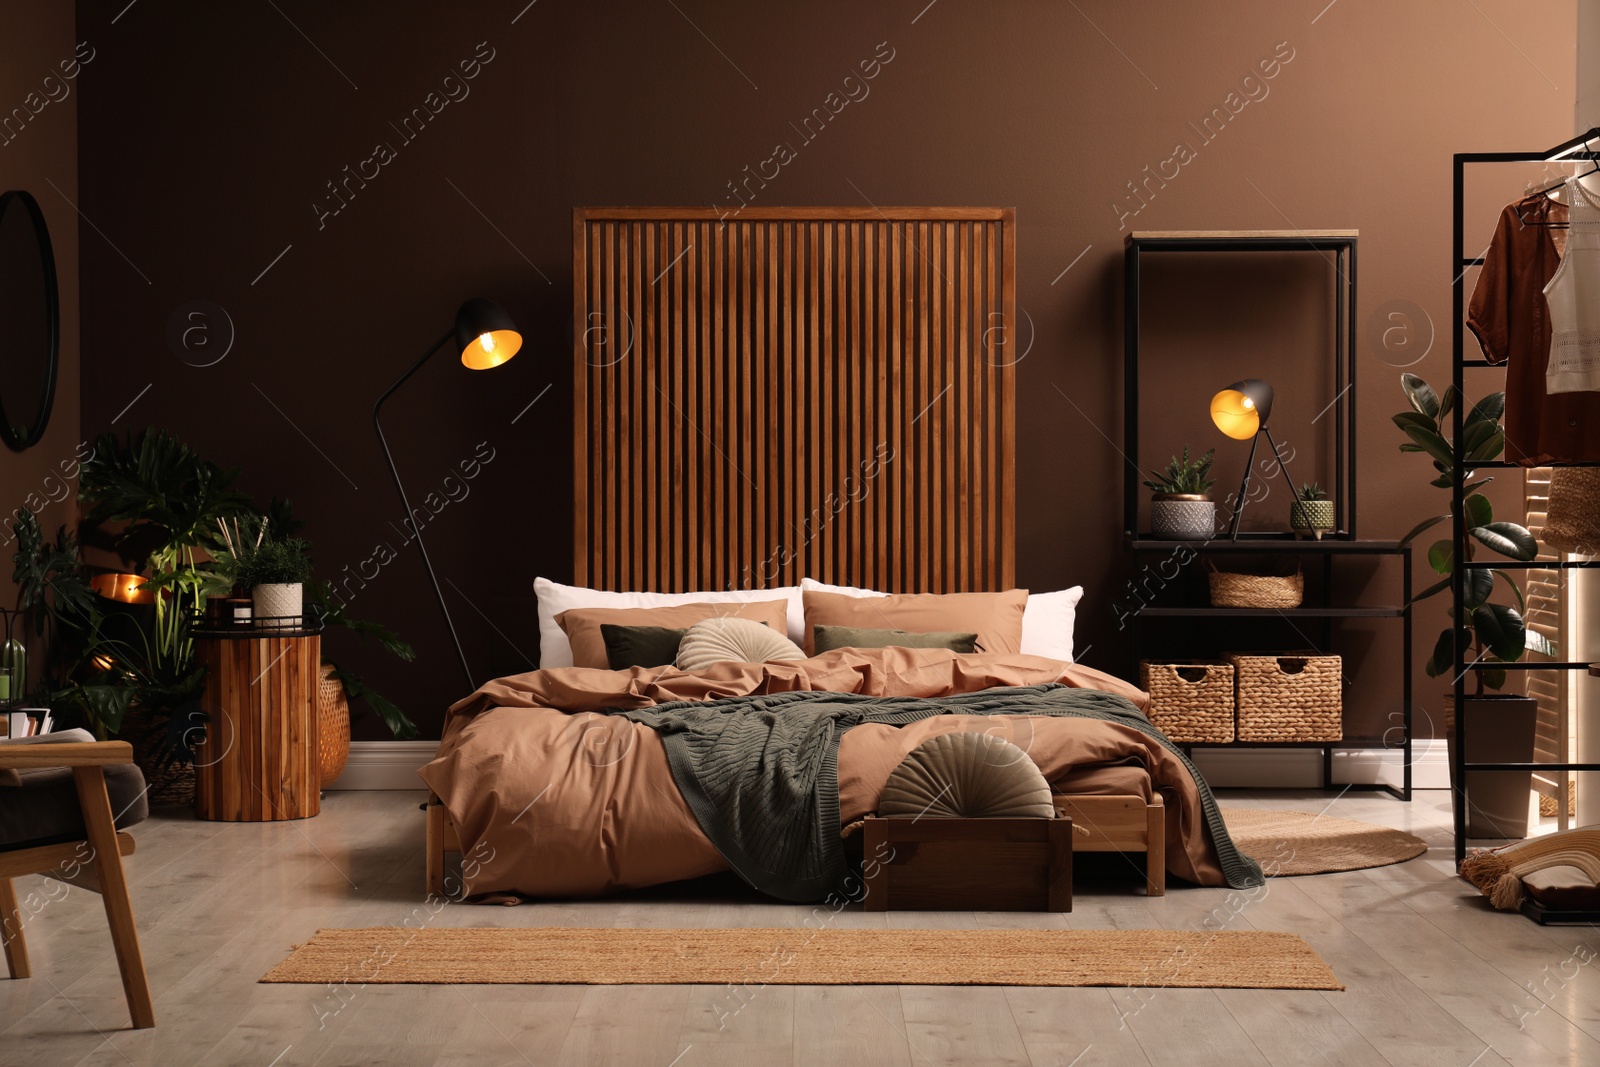 Photo of Stylish room interior with large bed near brown wall